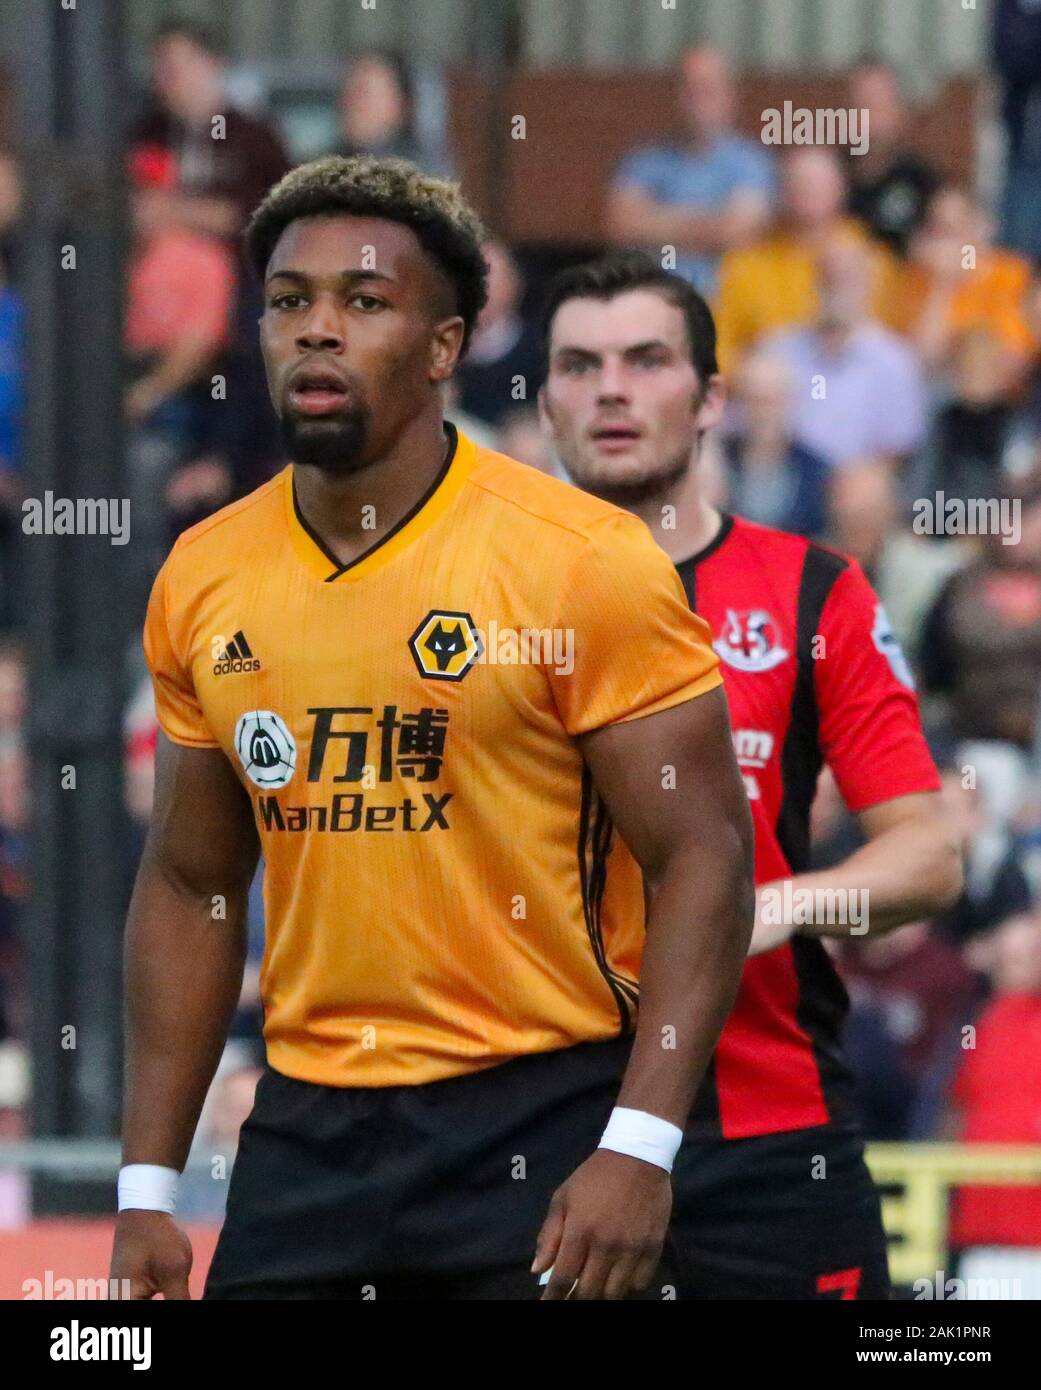 Seaview Stadium, Belfast, Northern Ireland. 01st Aug, 2019. UEFA Europa League Second Qualifying Round (Second Leg) Crusaders (red/black) v Wolves. Wolverhampton Wanderers player Adama Traore (37) in action. Stock Photo